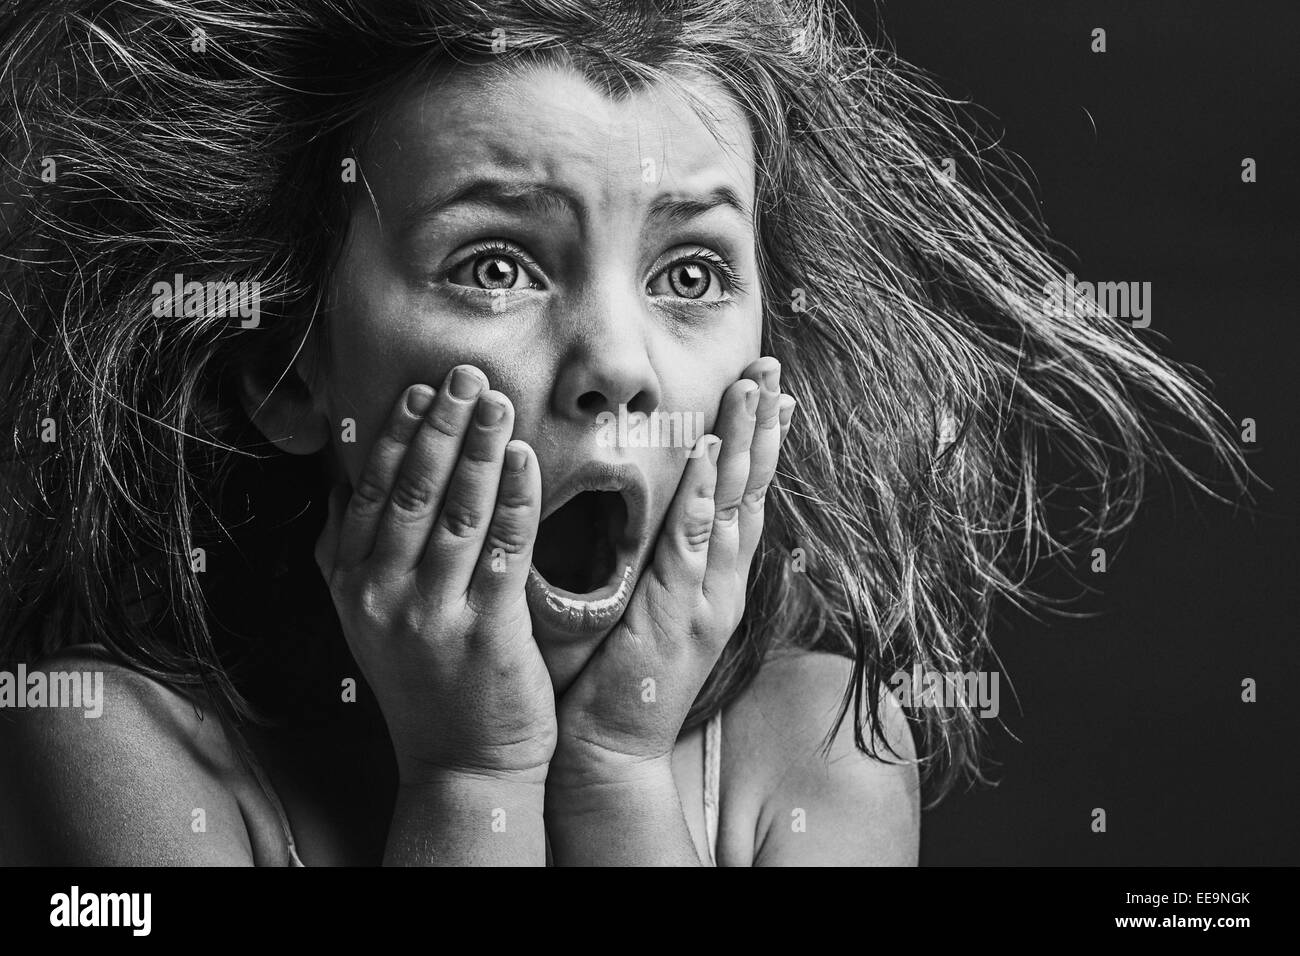 Powerful Image of Scared Child Stock Photo